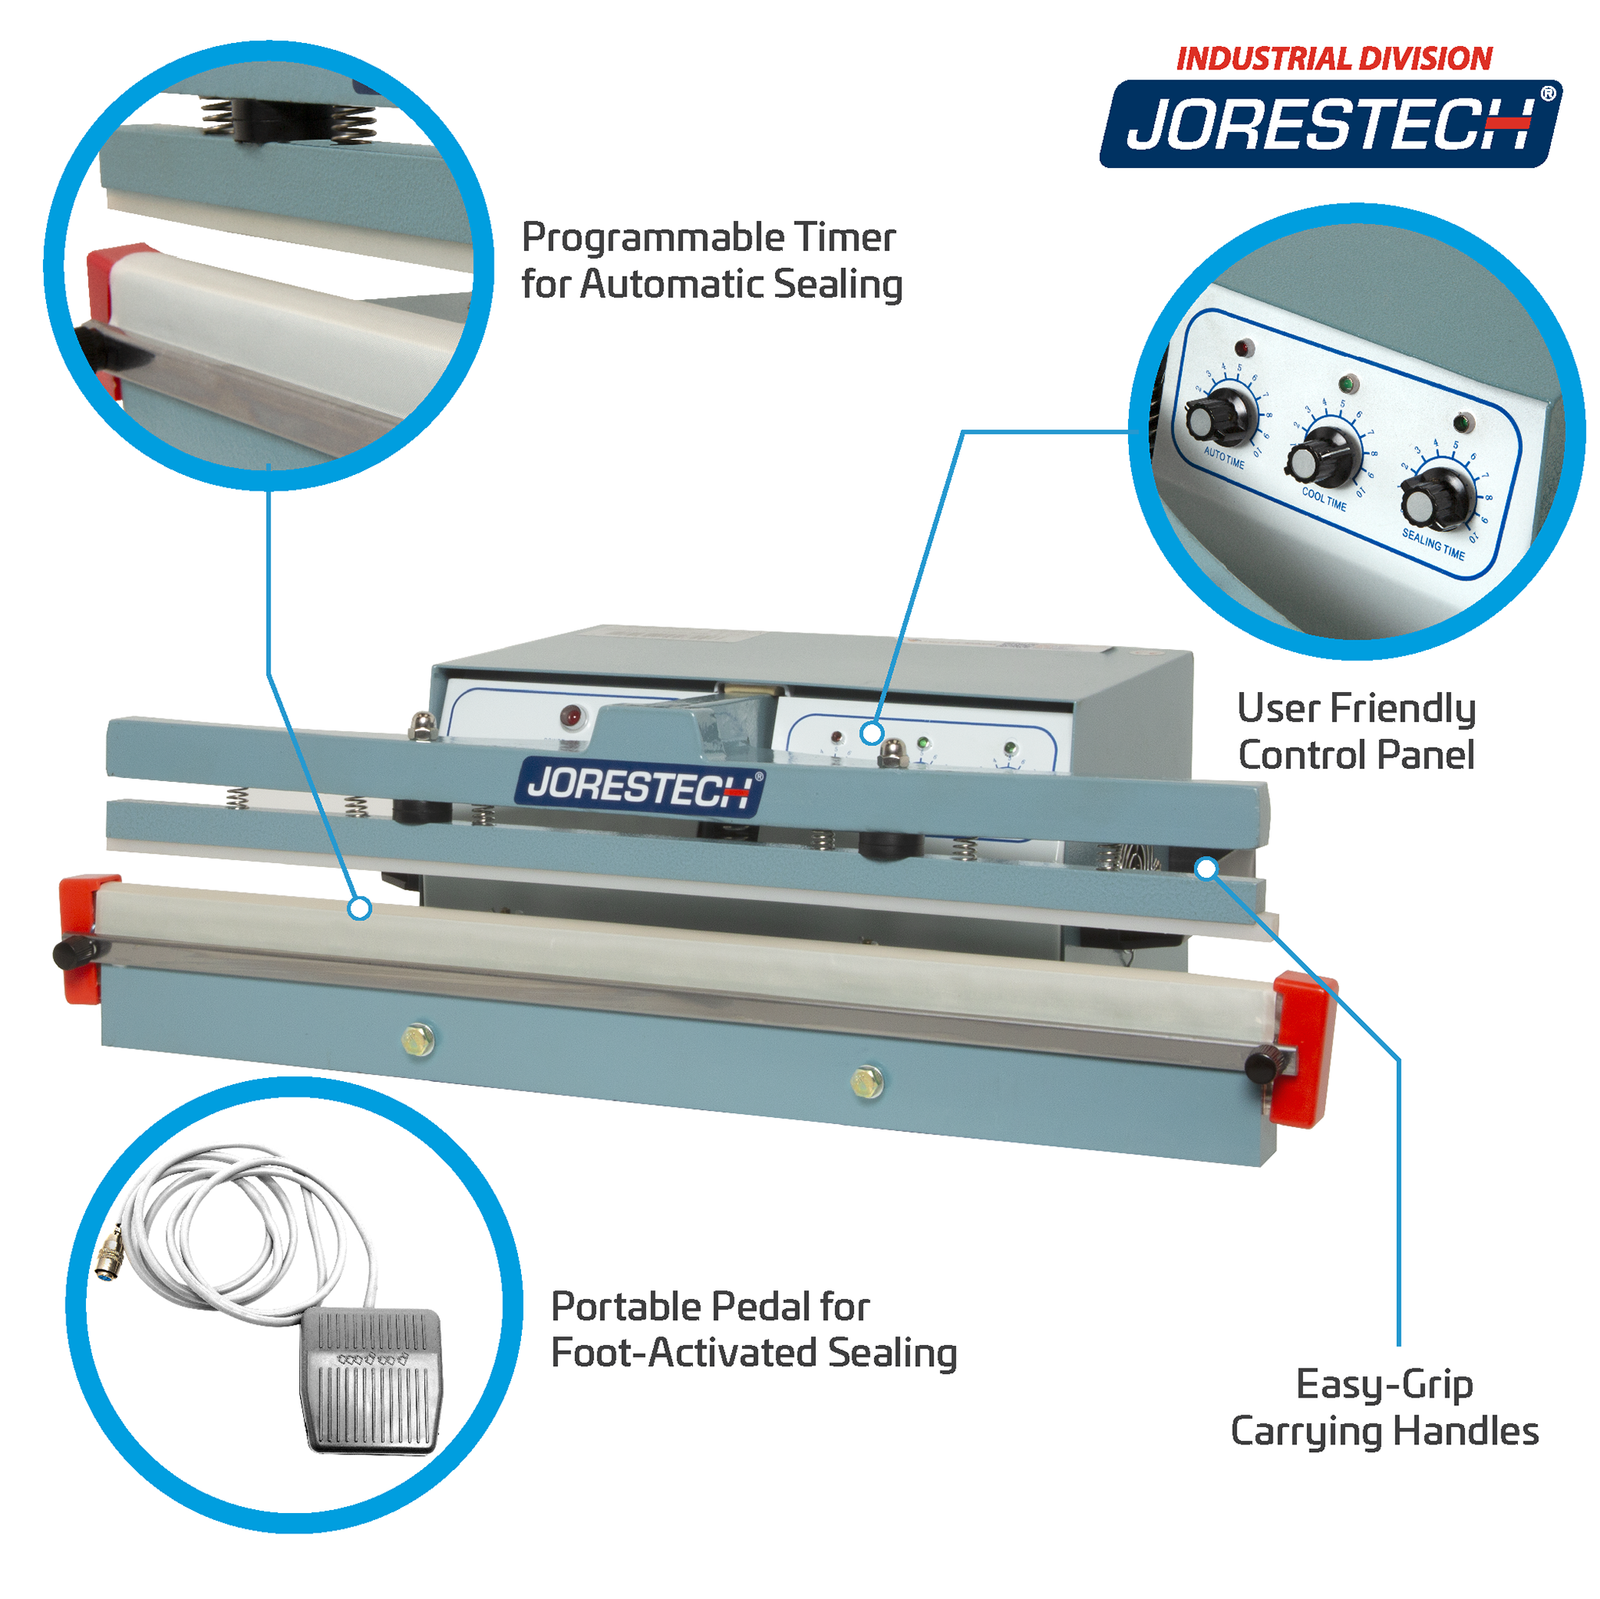 Infographic shows blue JORES TECHNOLOGIES® foot impulse bag sealer. Features include, Programmable Timer for Automatic Sealing, User Friendly Control Panel, Portable Pedal for Foot-Activated Sealing, and Easy-Grip carrying handles. Close-ups of sealing element, foot pedal, and control panel.